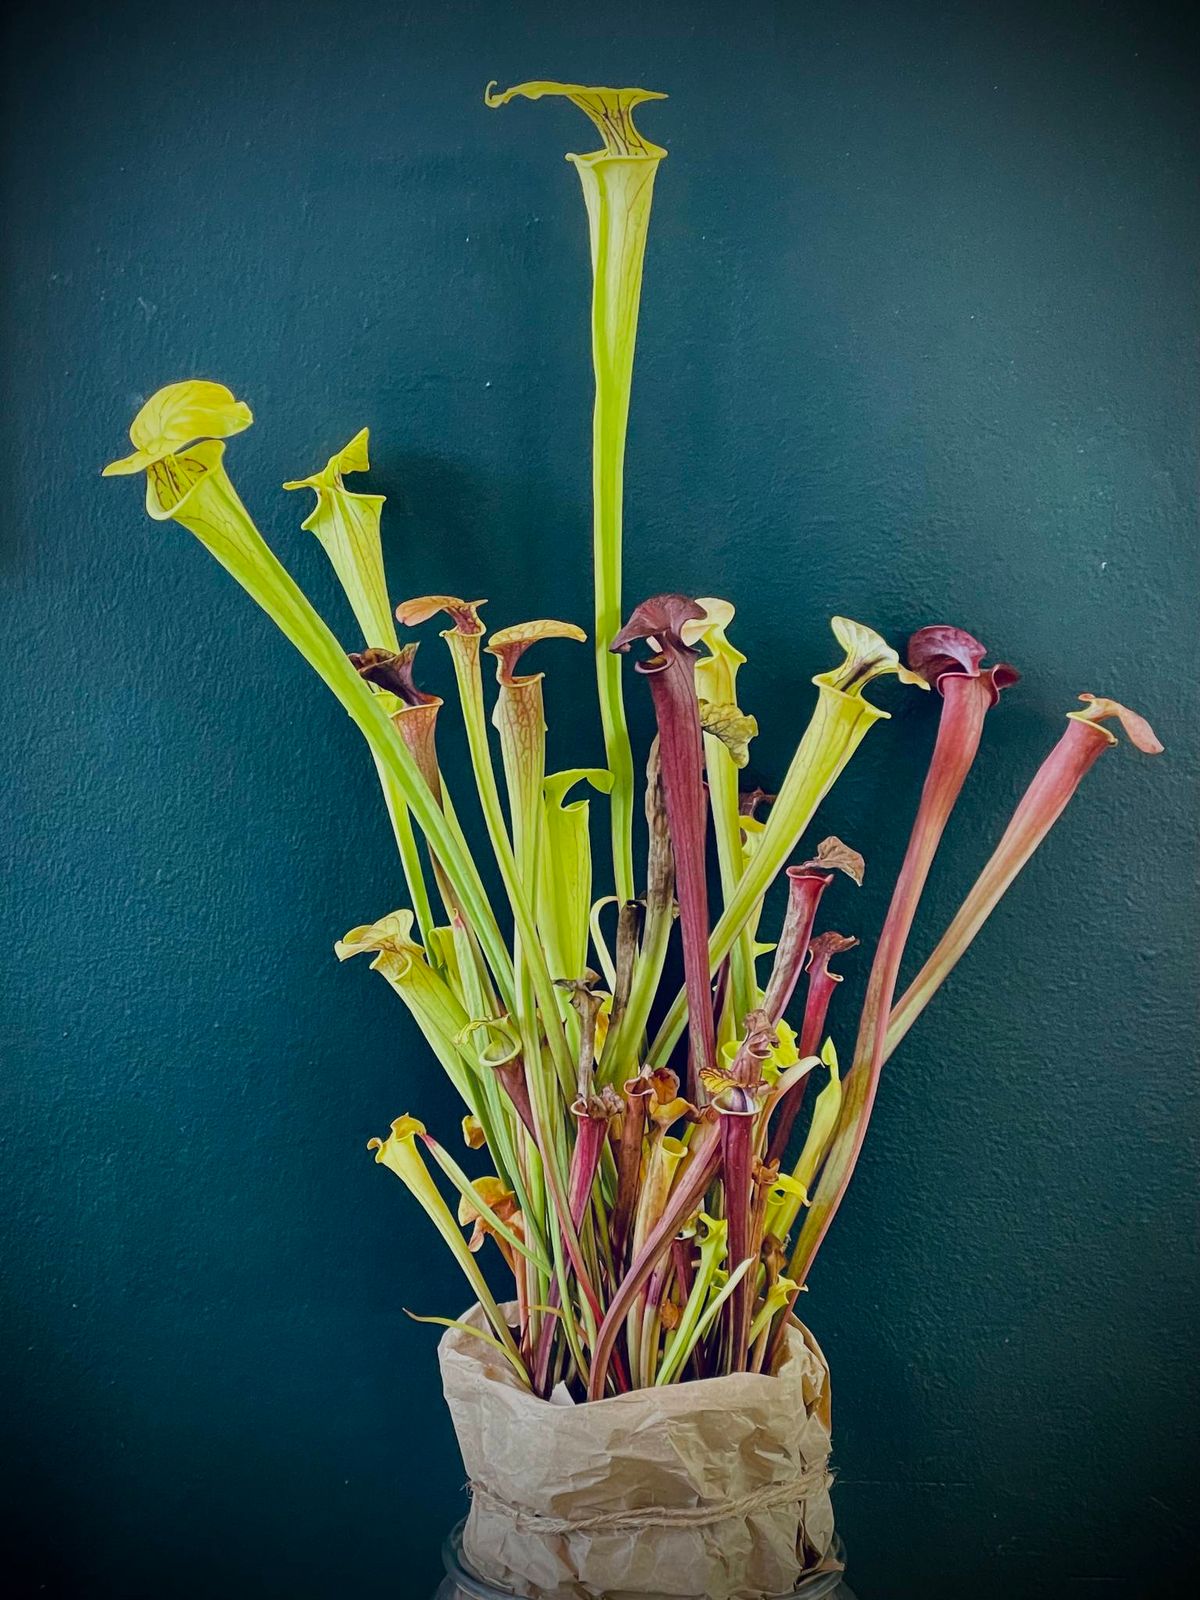 Learn to Build Your Own Carnivorous Plant Bog Garden